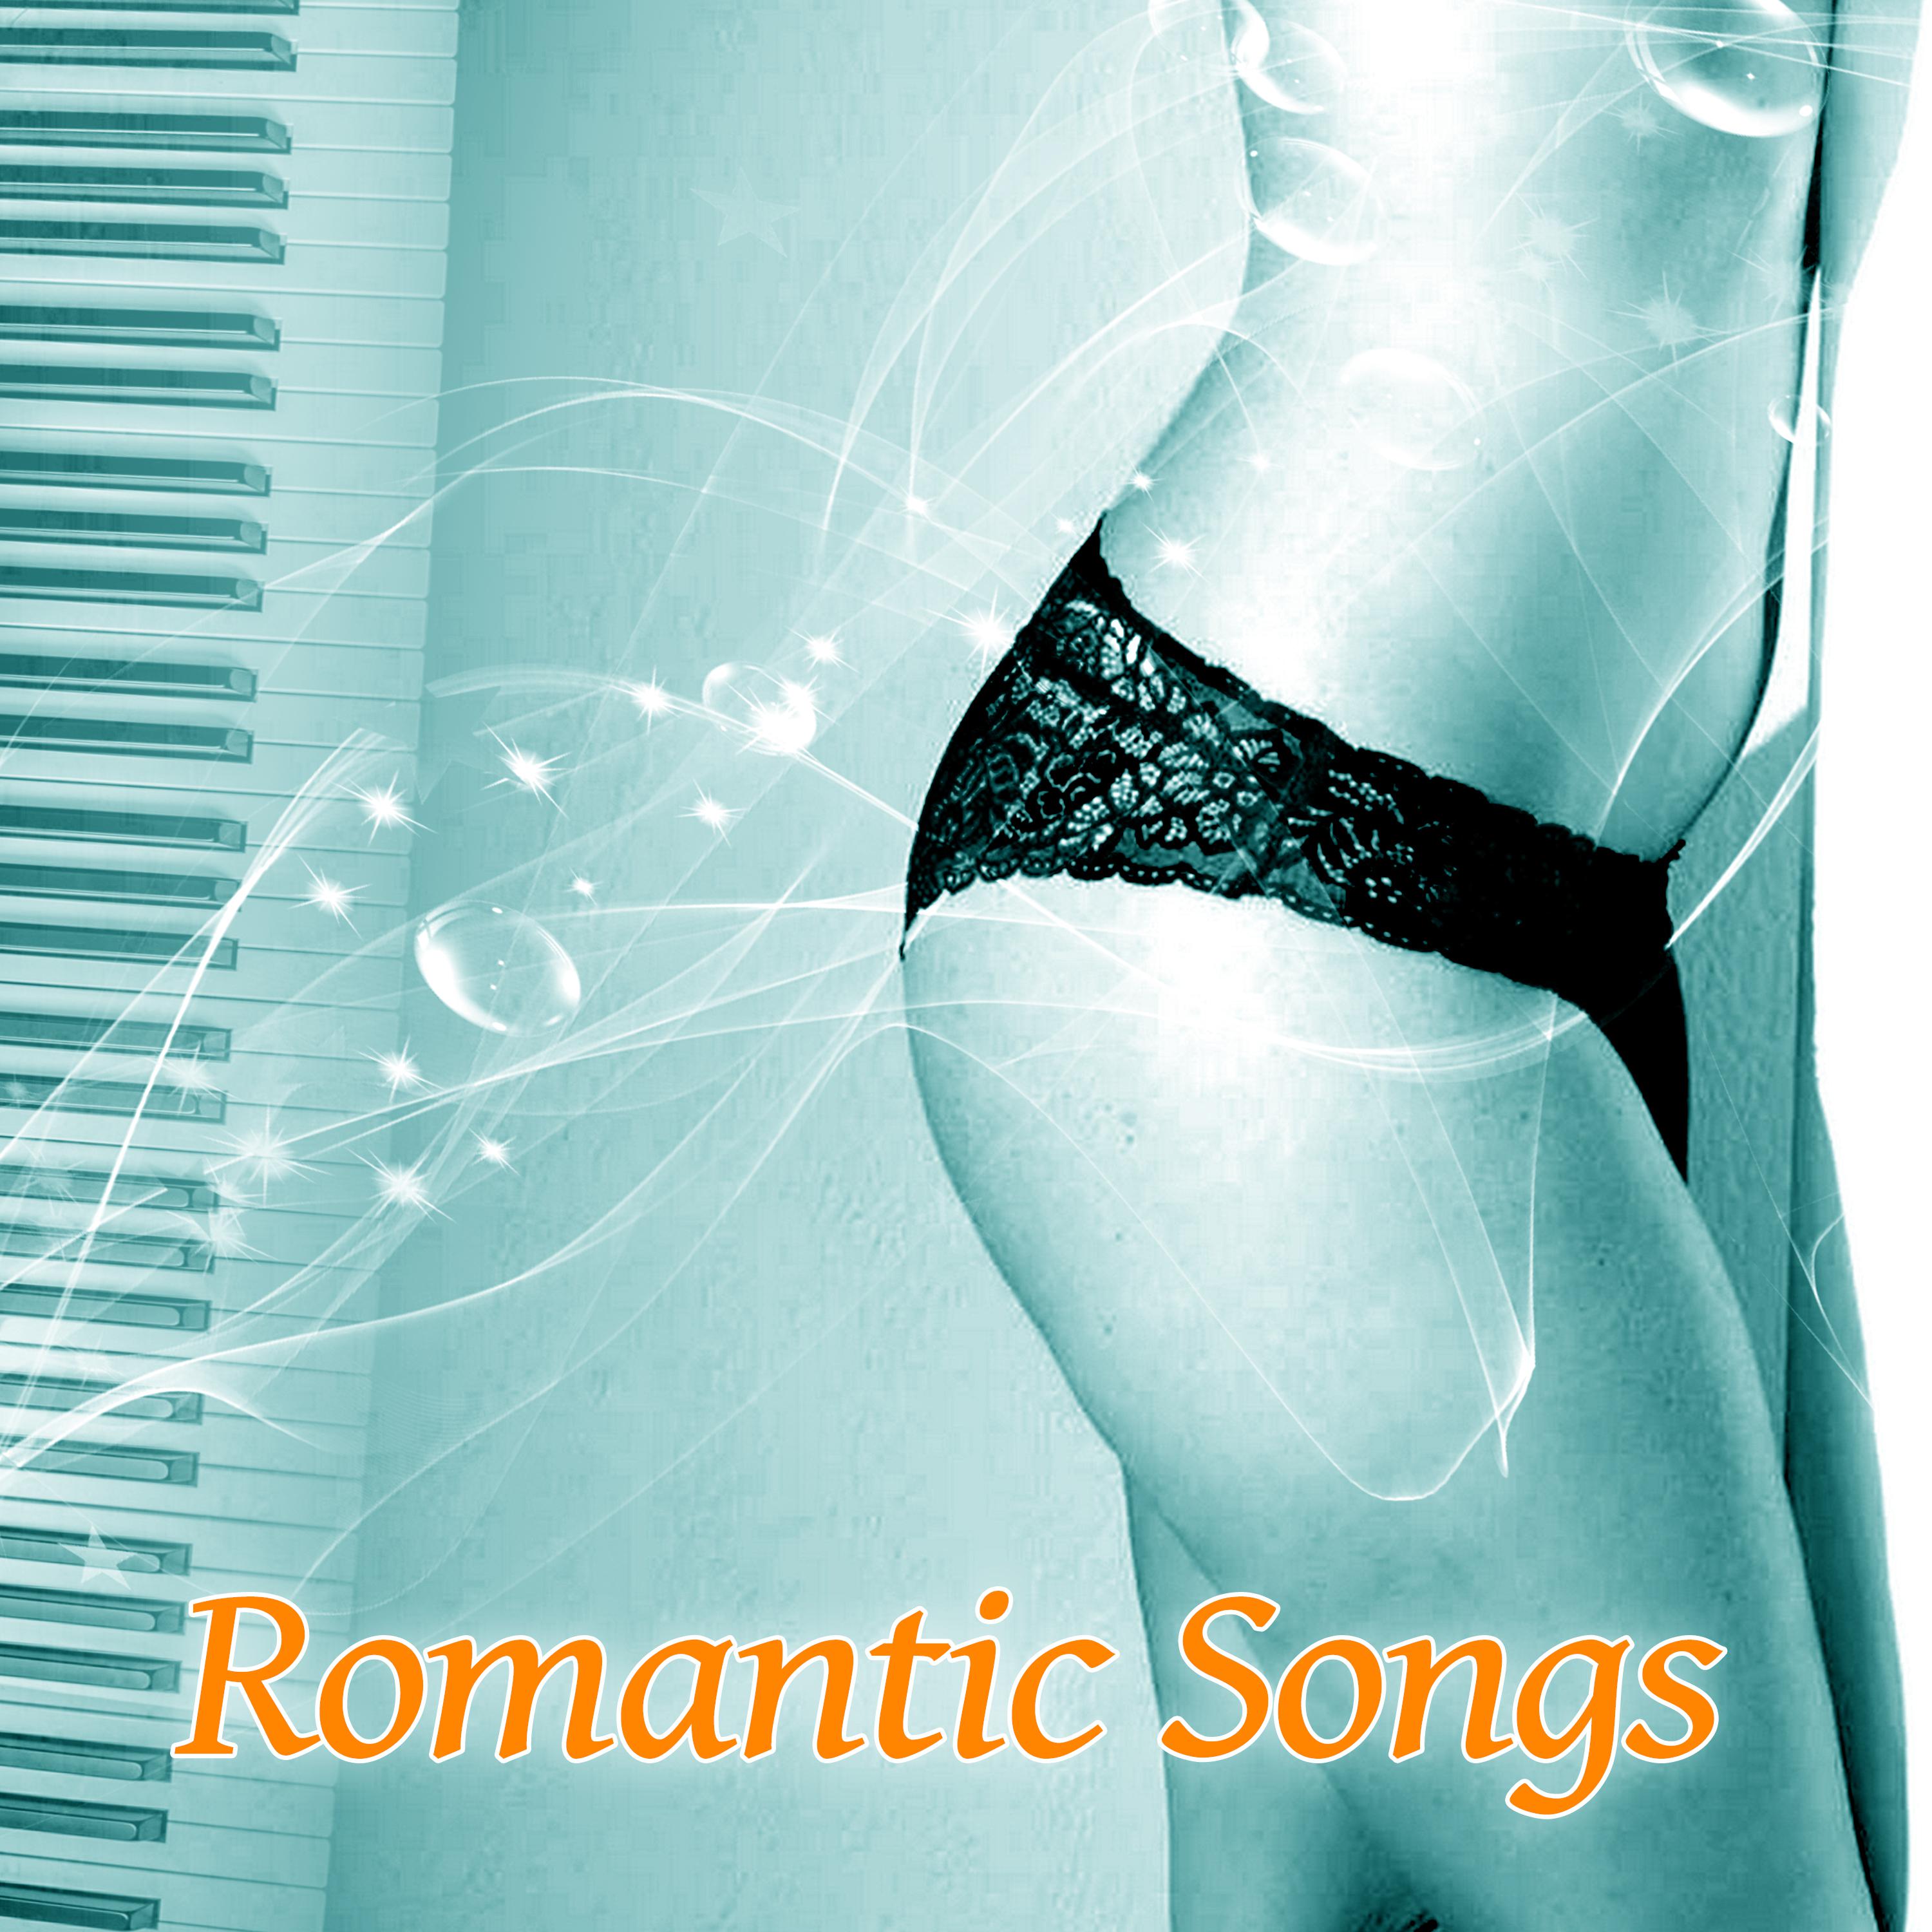 Romantic Songs  Best Sensual Jazz Music, Romantic Music for Evening, Long Night, Jazz for Lovers, First Lover